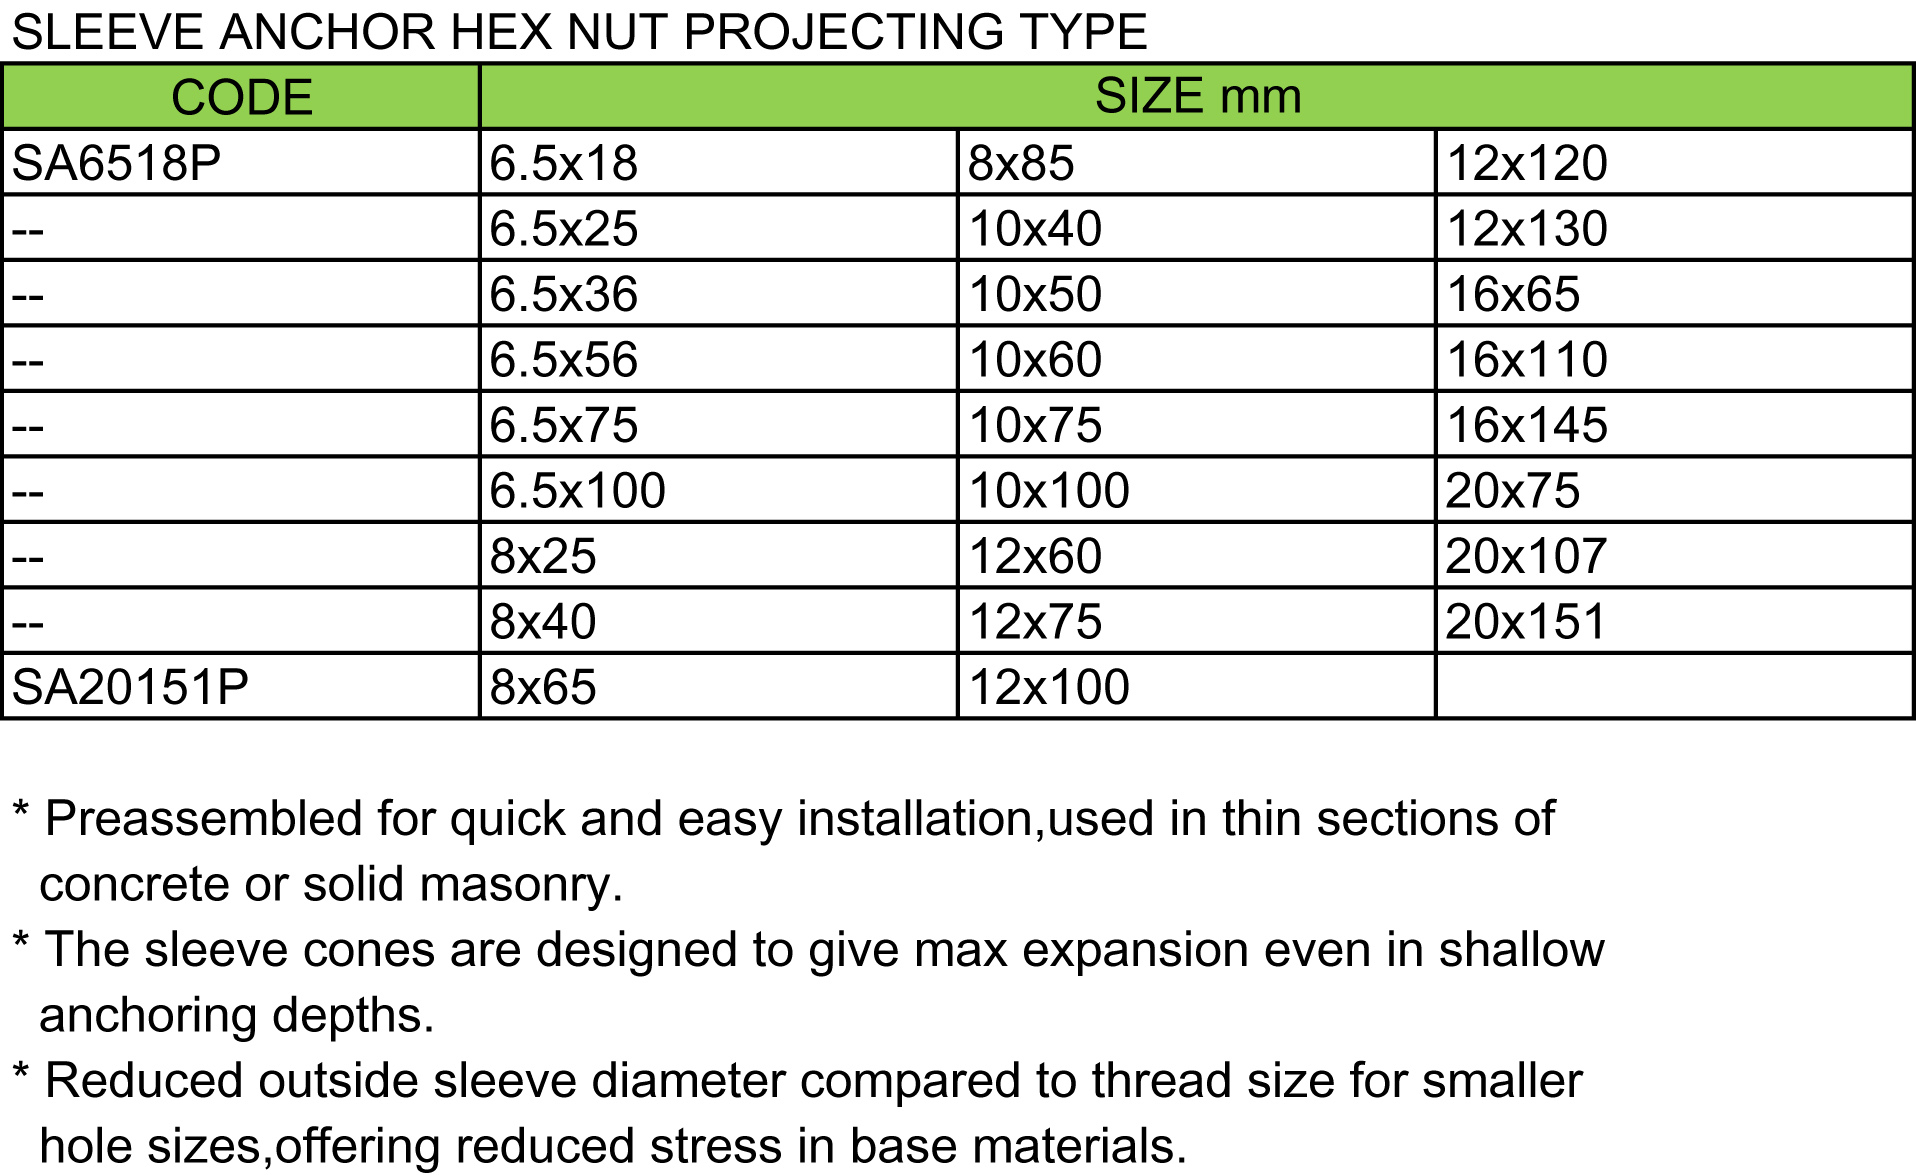 Sleeve Anchor Hex Nut Projecting Type(图1)